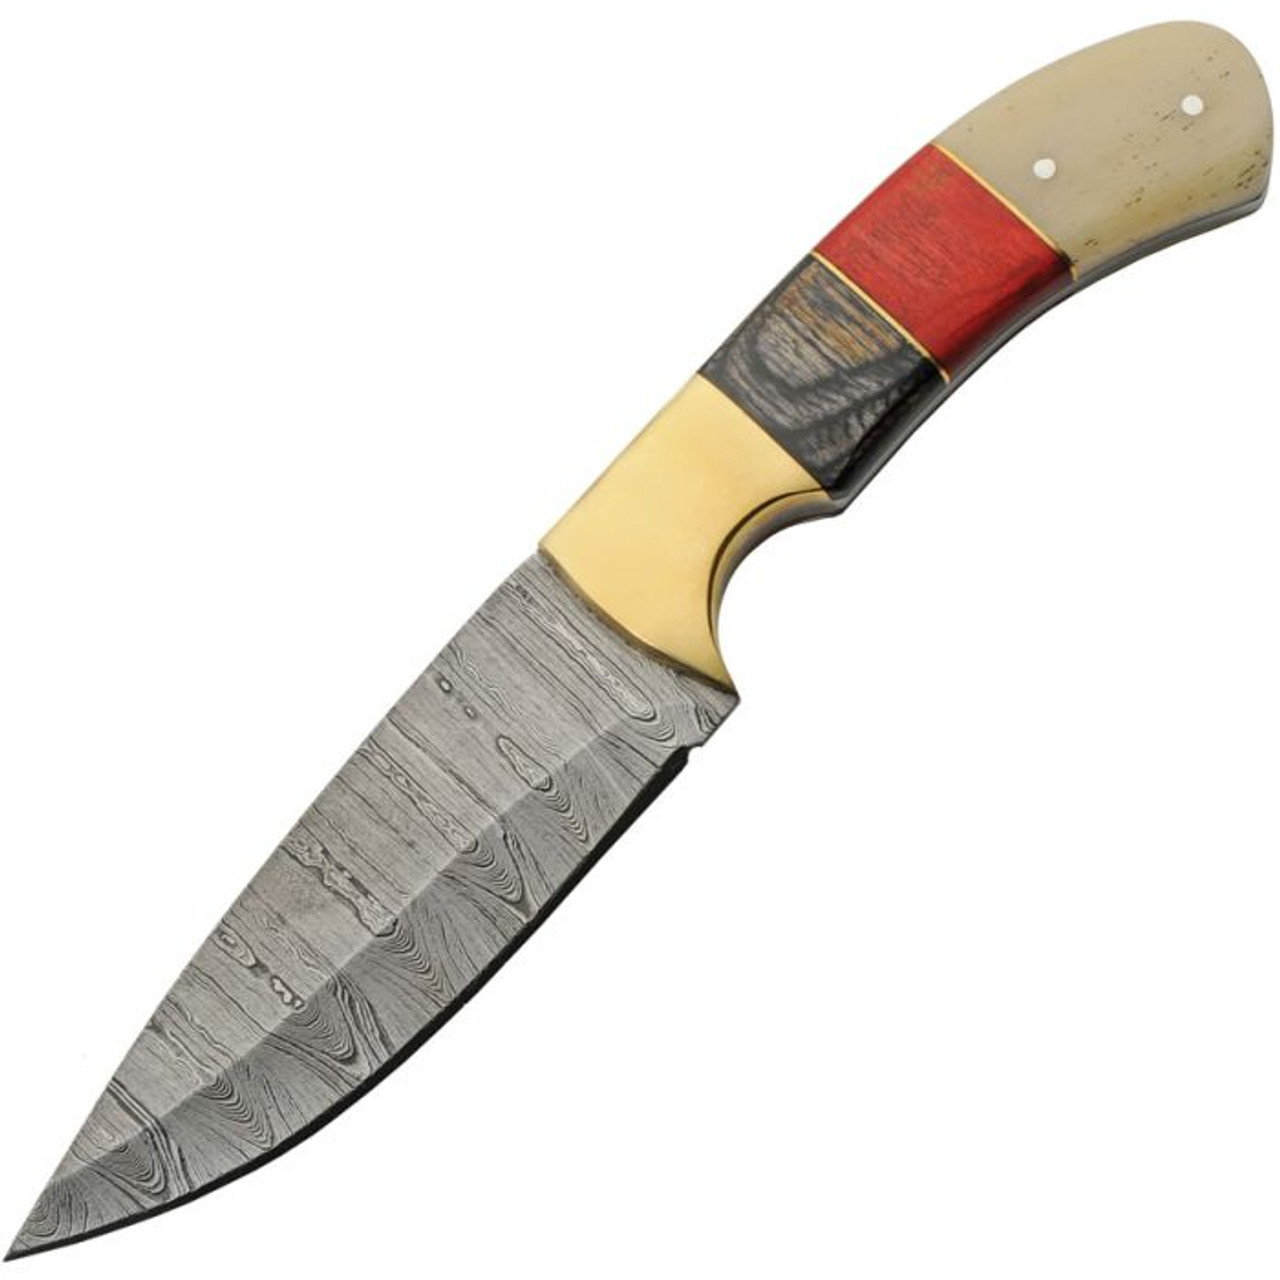 Damascus Knives Hunter (DM1338) 4.5" Damascus Drop Point Plain Blade, Black and Red Wood with White Smooth Bone Handle, Brown Leather Belt Sheath